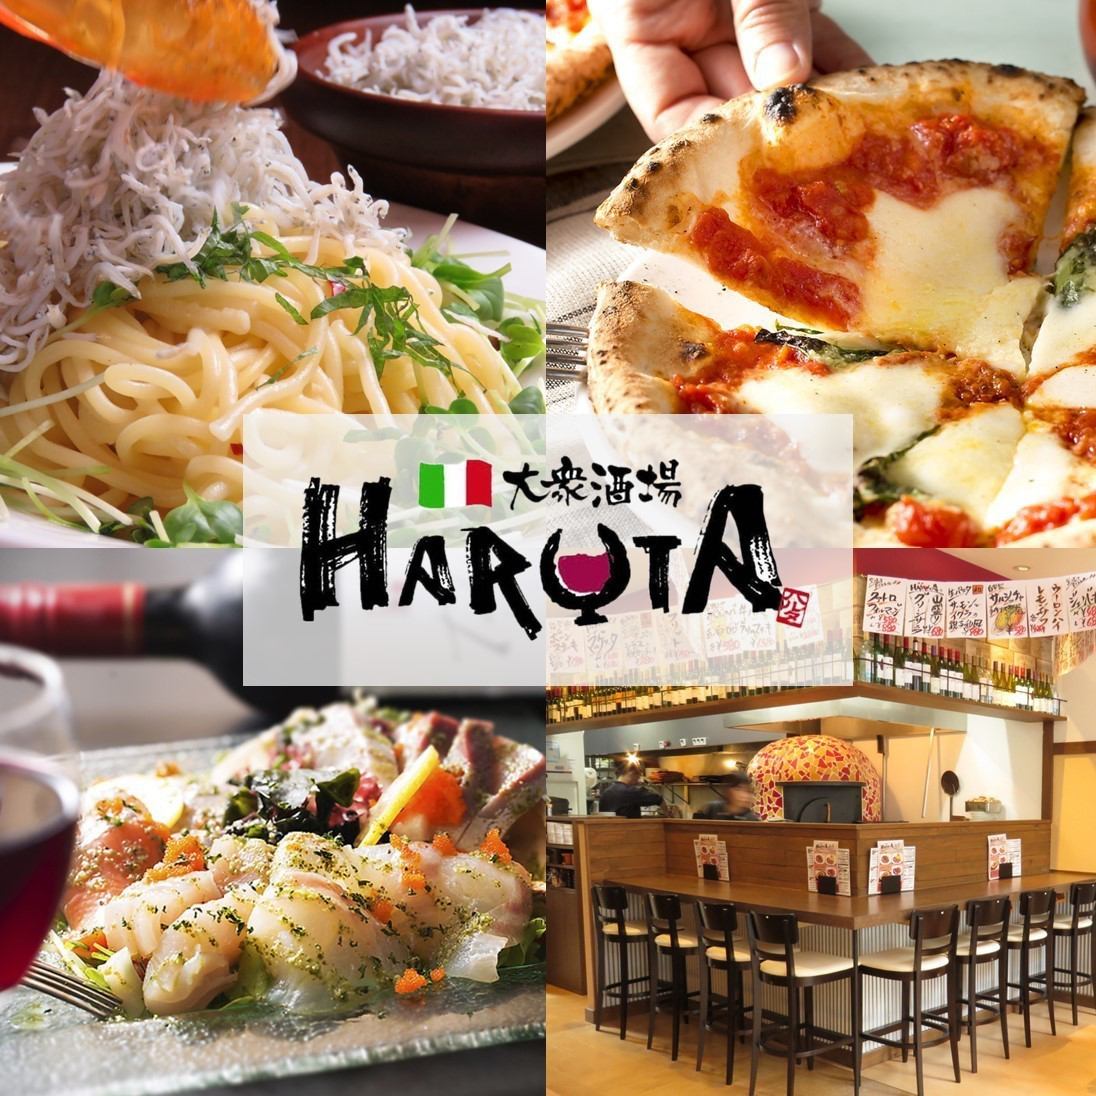 Enjoy Italian cuisine♪ The store has a popular feel and is surprisingly cost effective! Takeout is OK